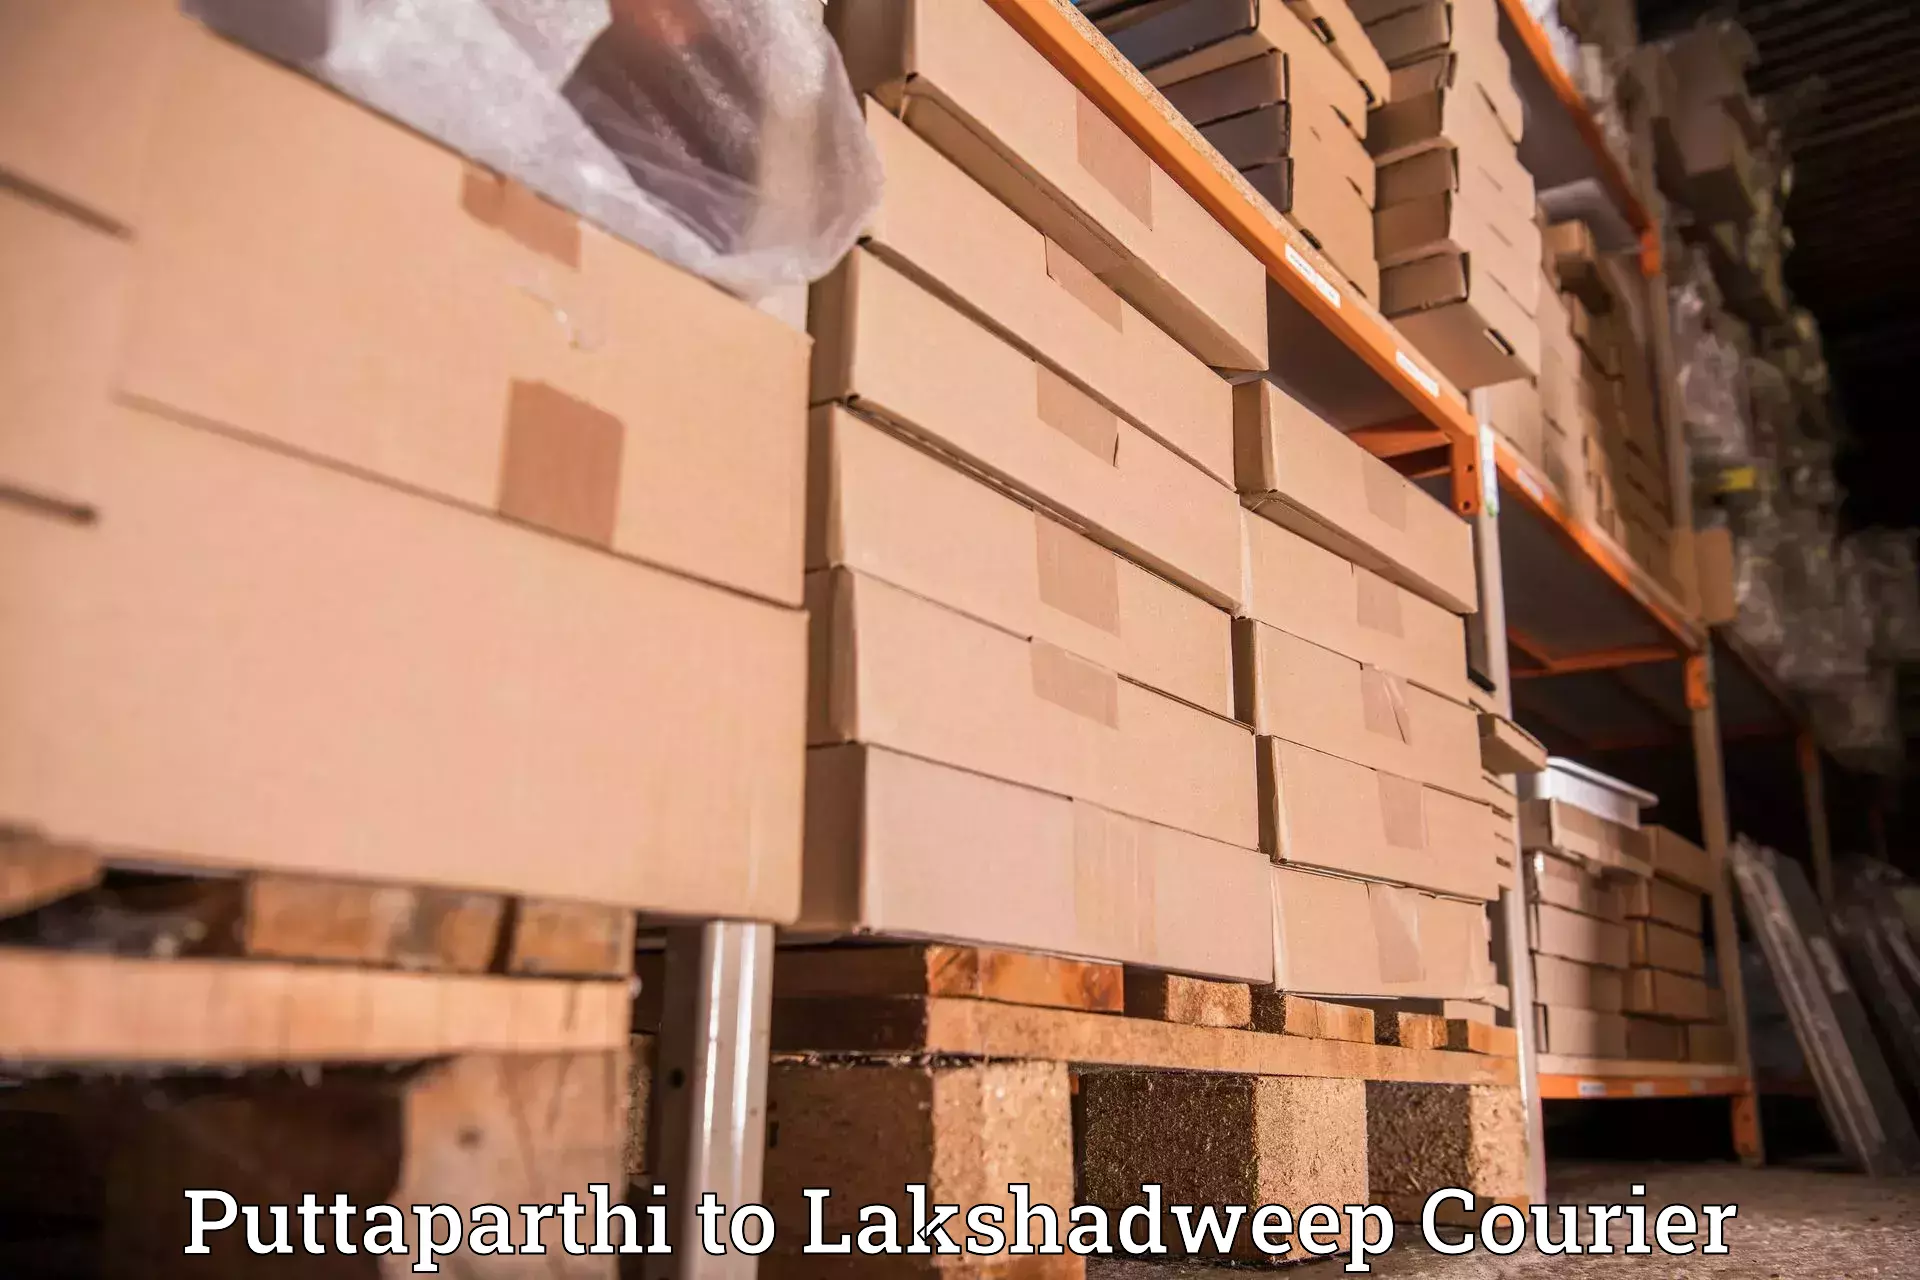 Parcel service for businesses Puttaparthi to Lakshadweep